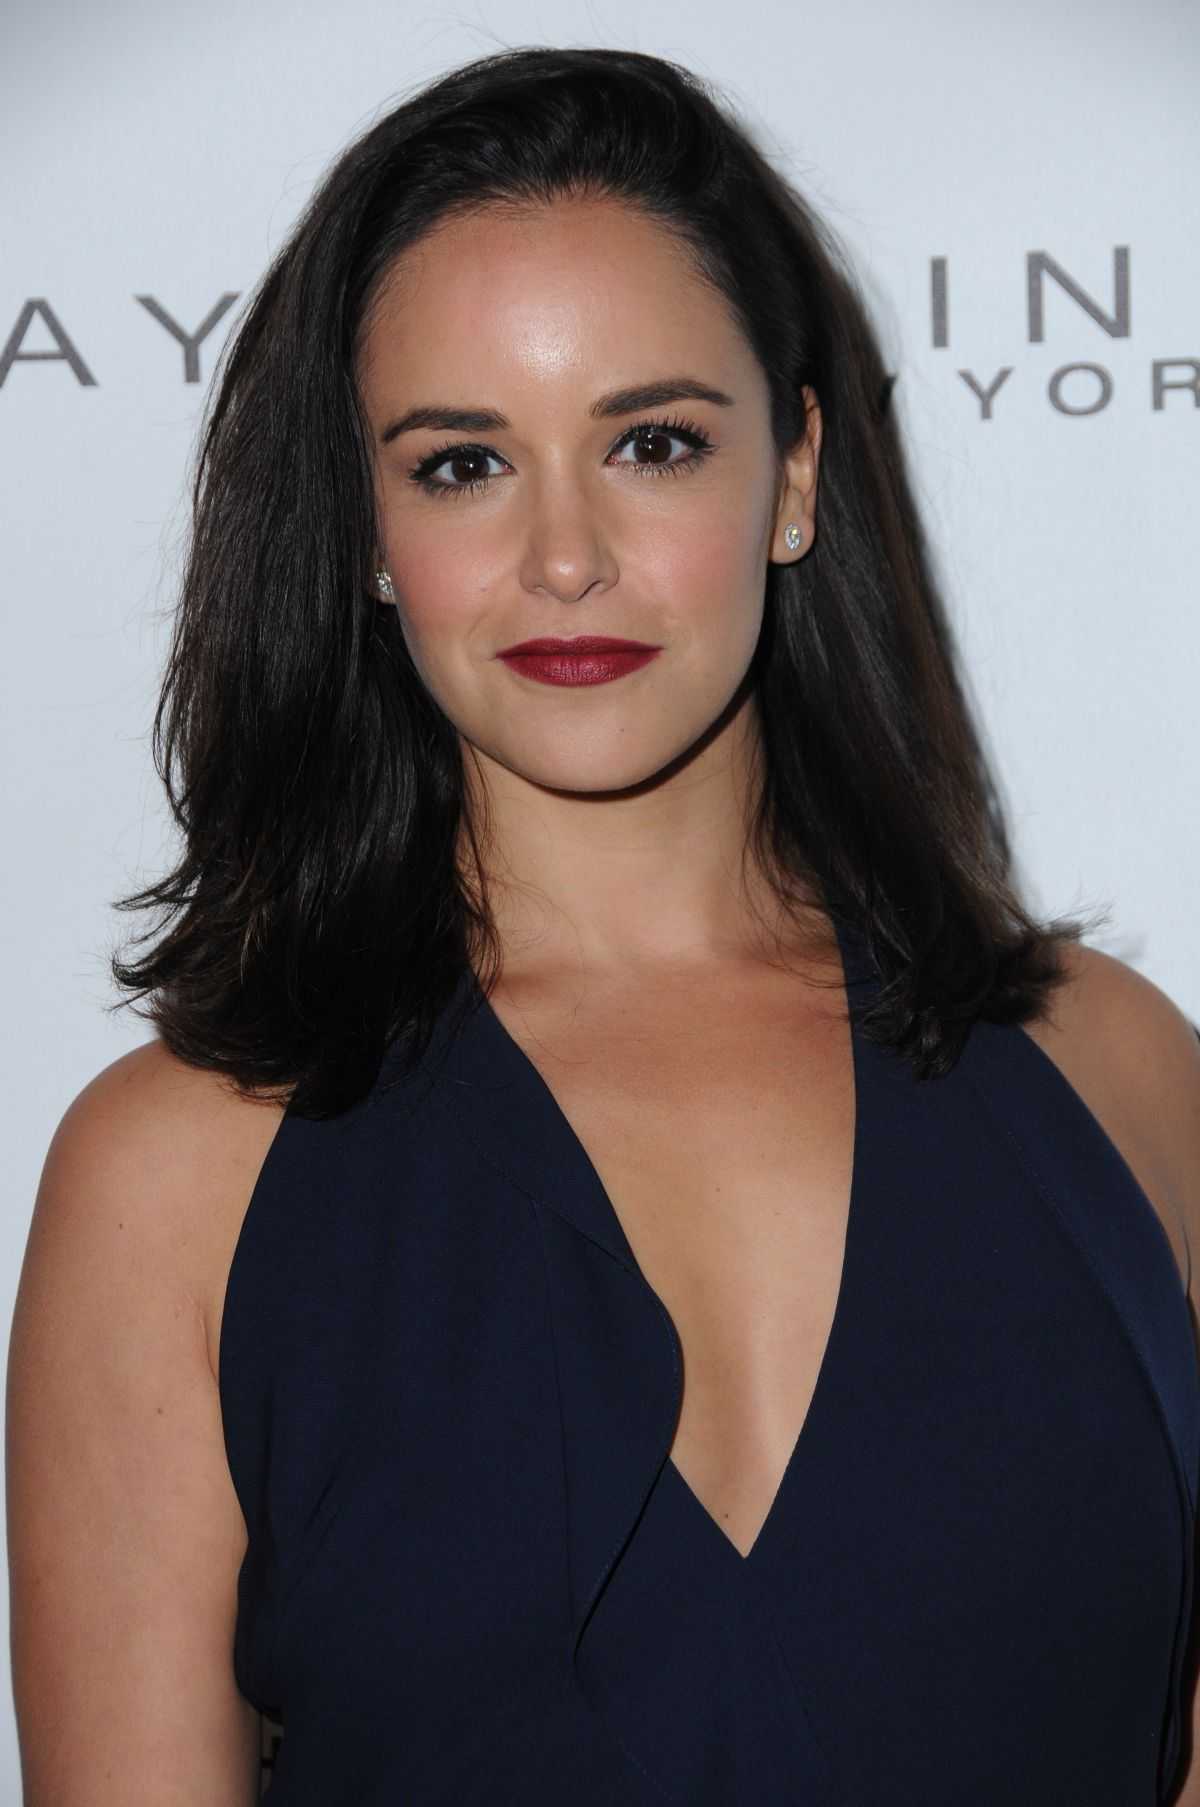 75+ Hot Pictures of Melissa Fumero Explore Her Sexy Body - The Viraler.